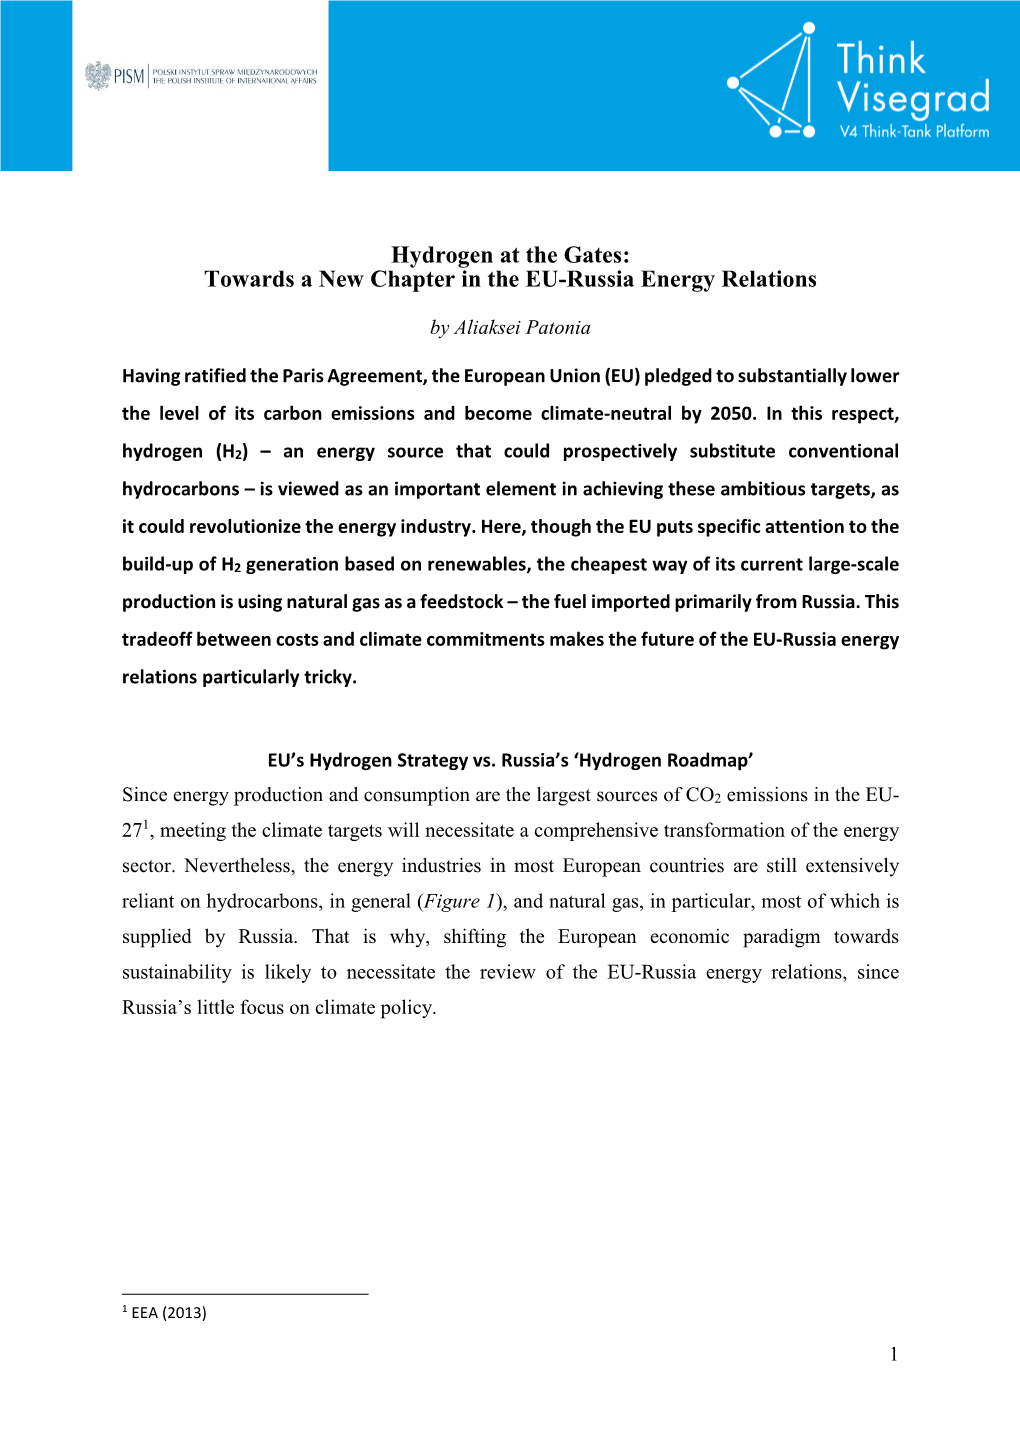 Hydrogen at the Gates: Towards a New Chapter in the EU-Russia Energy Relations